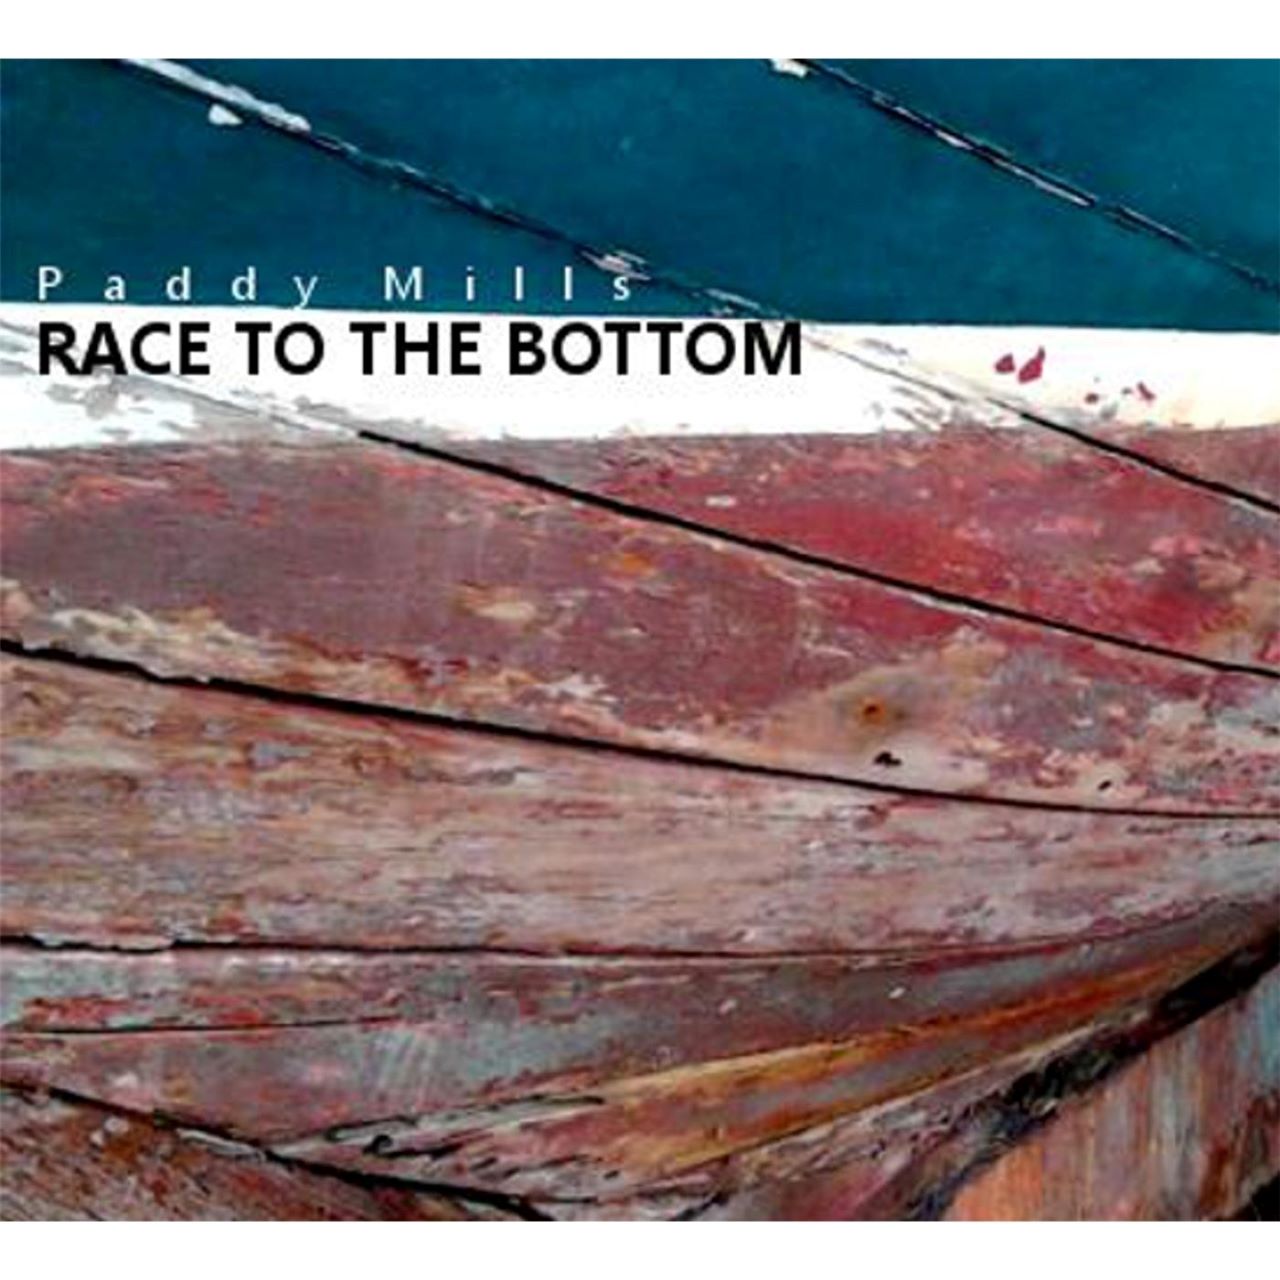 Paddy Mills - Race To The Bottom cover album